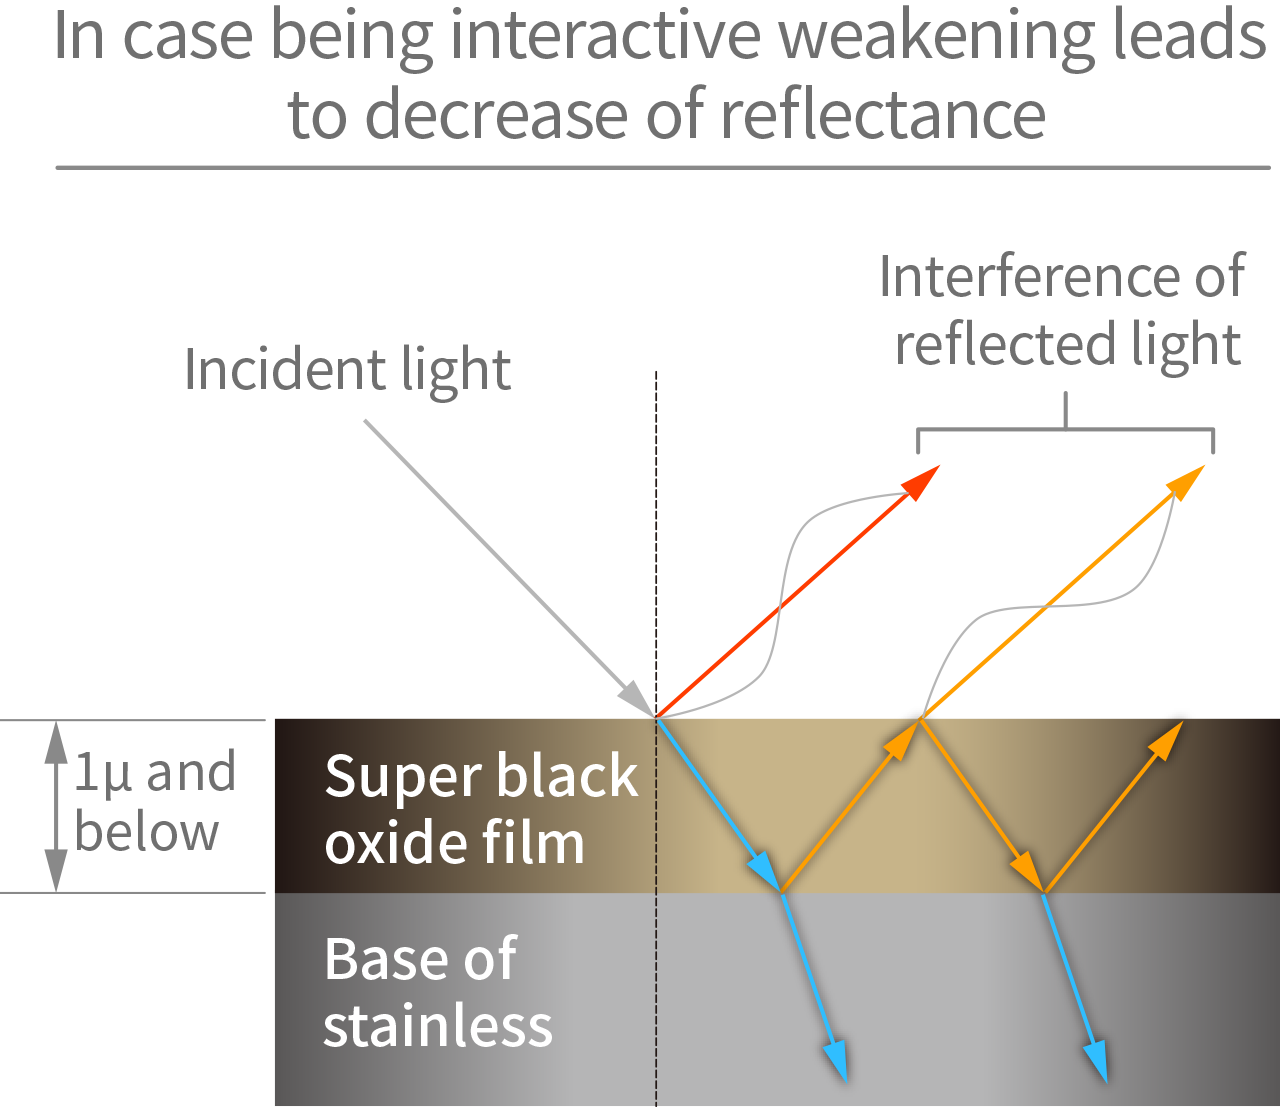 In case being interactive weakening leads to decrease of reflectance